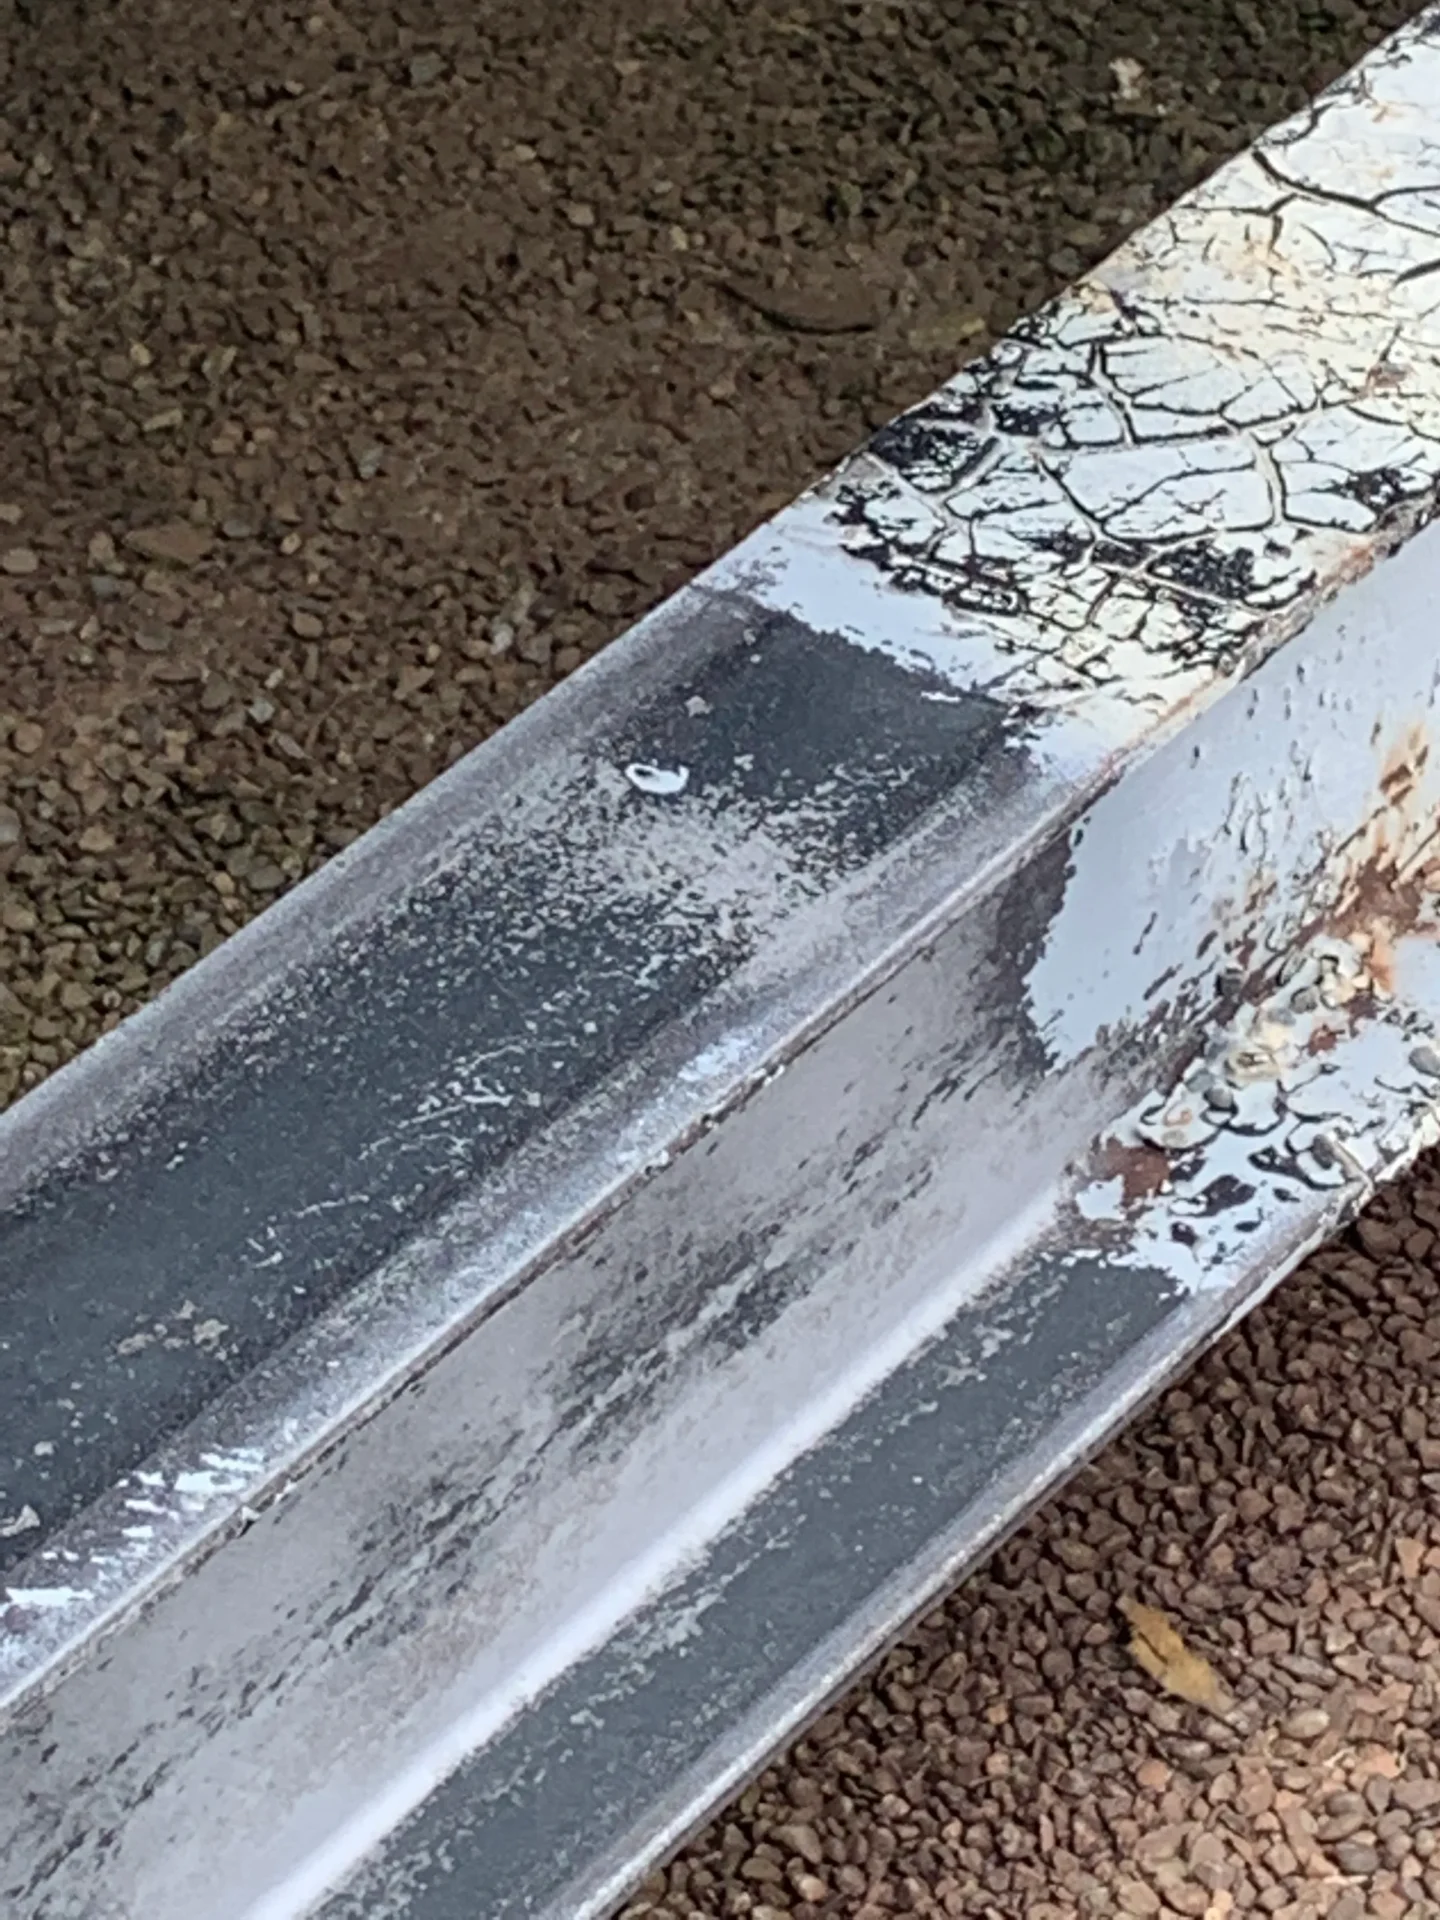 A metal rail with some paint on it